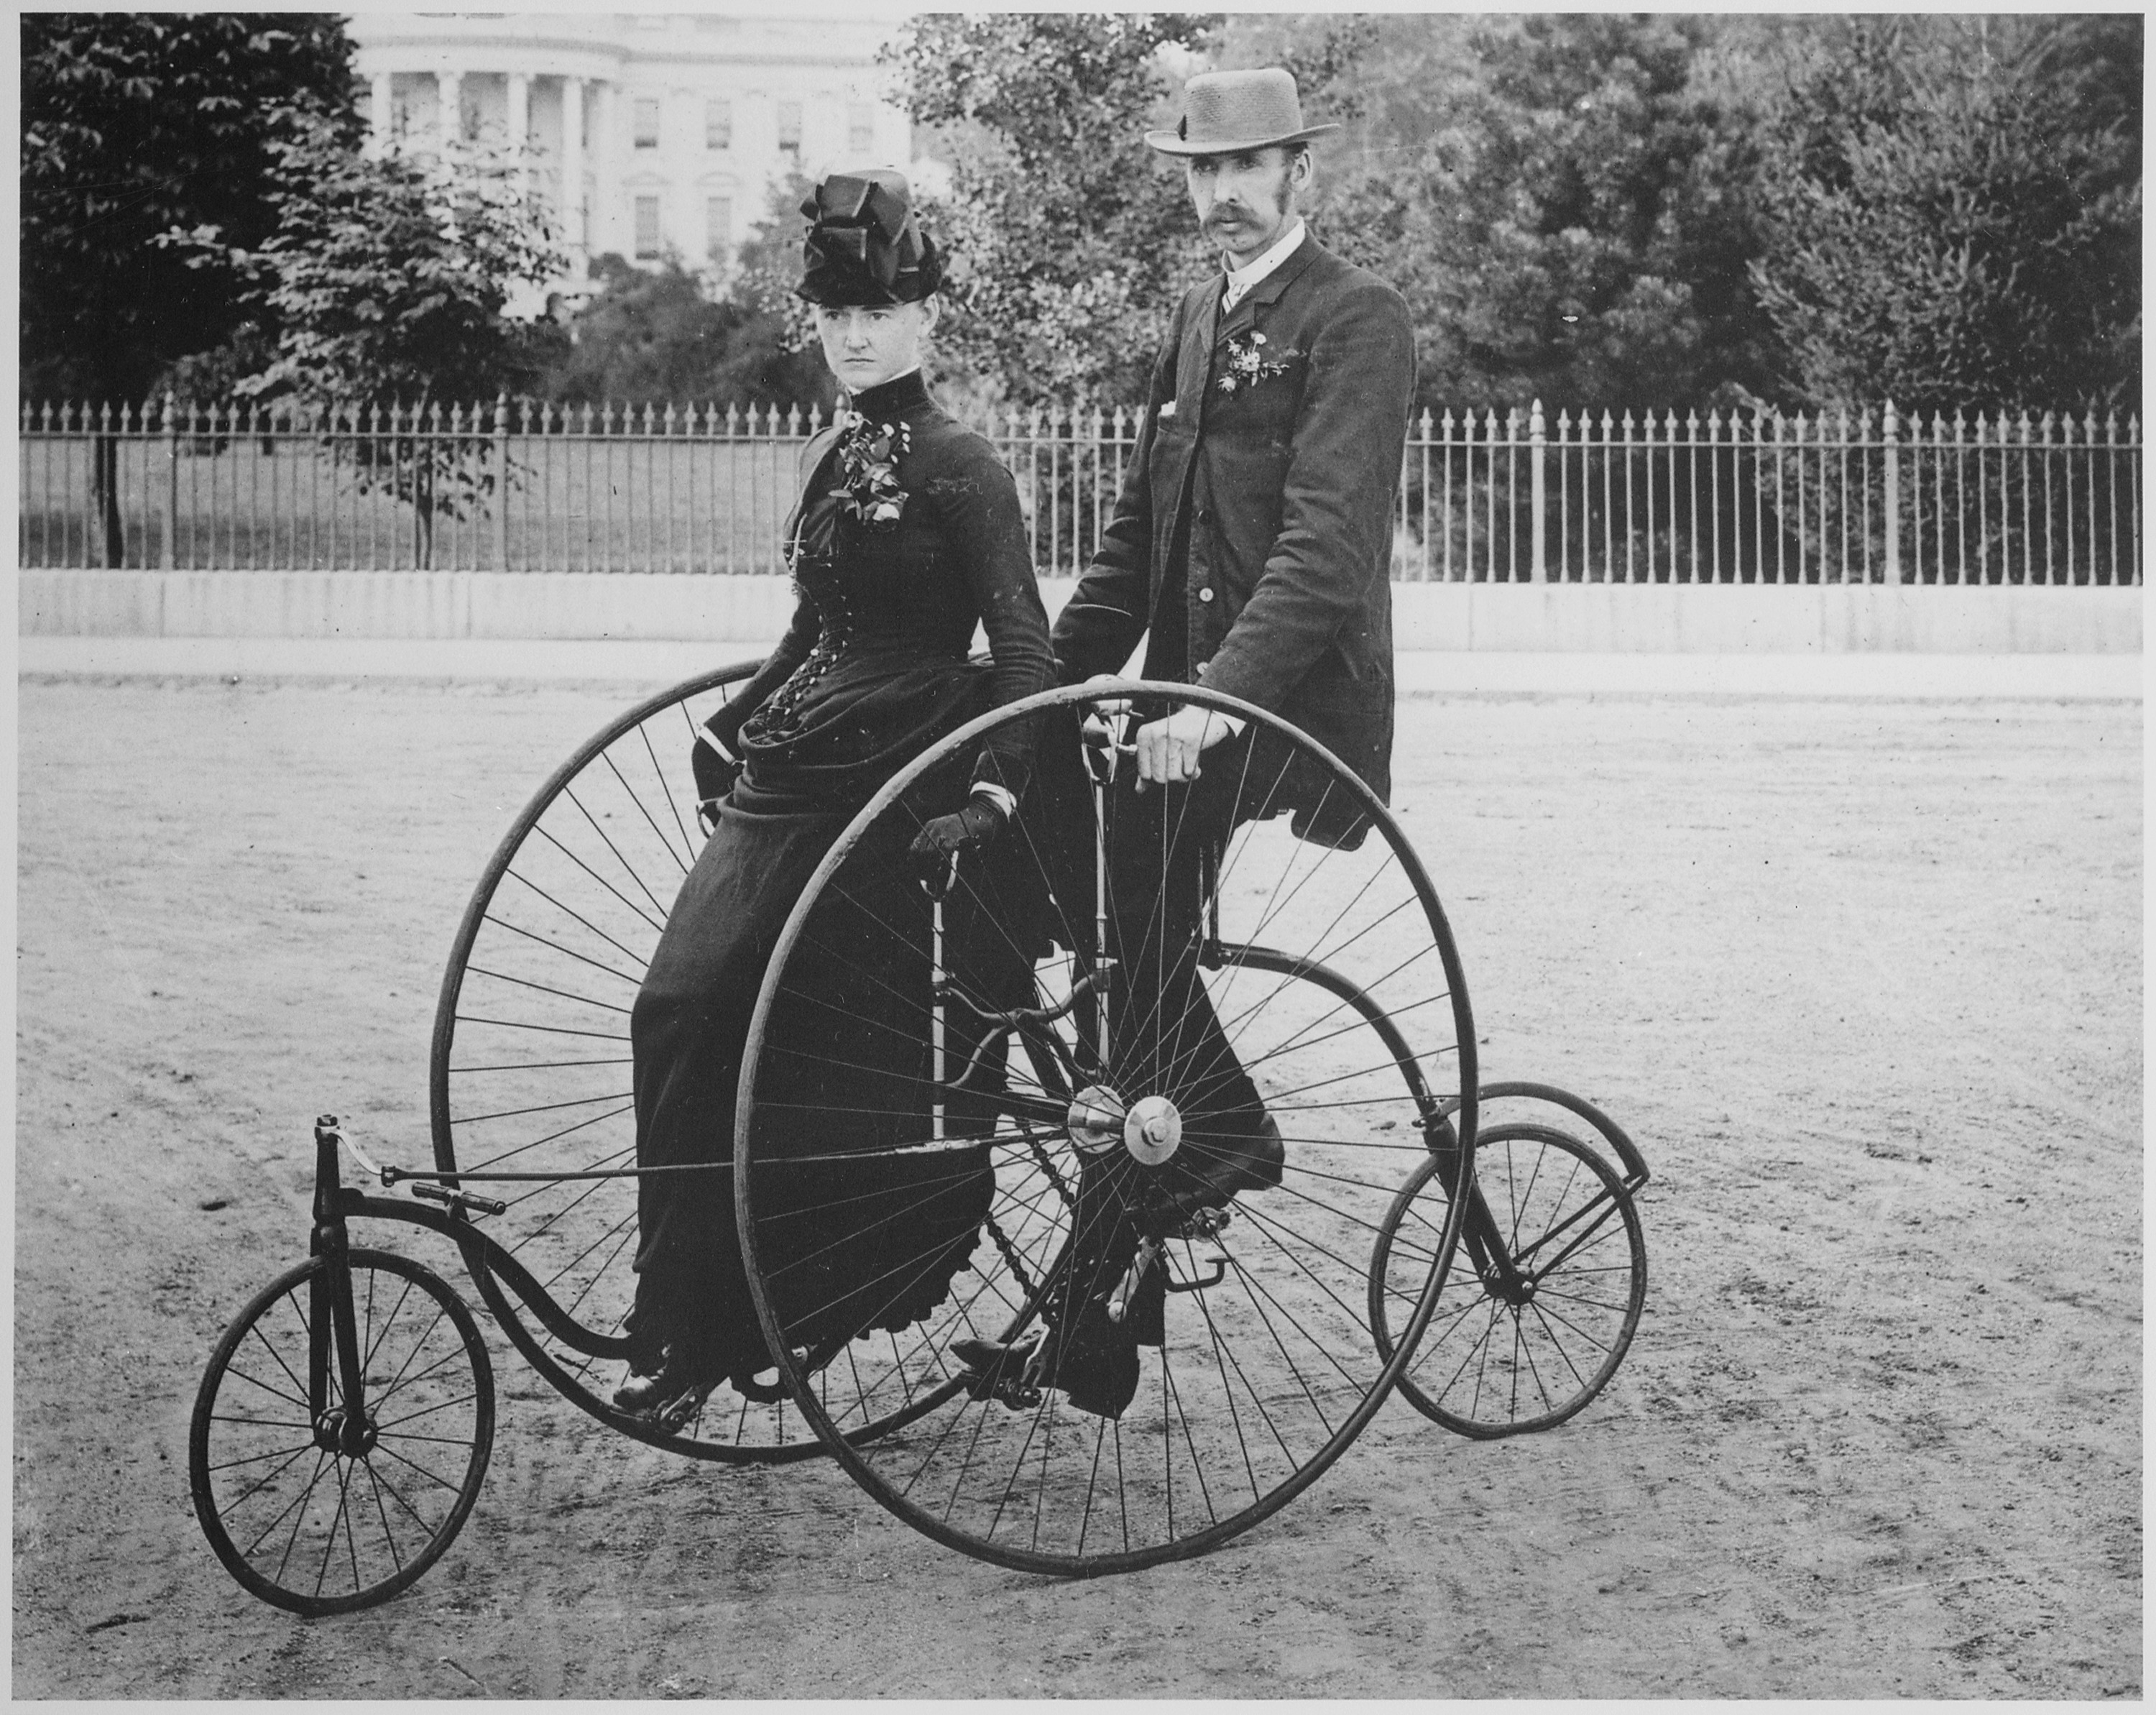 Smartly dressed couple seated on an 1886-model bicycle for two - NARA - 519711